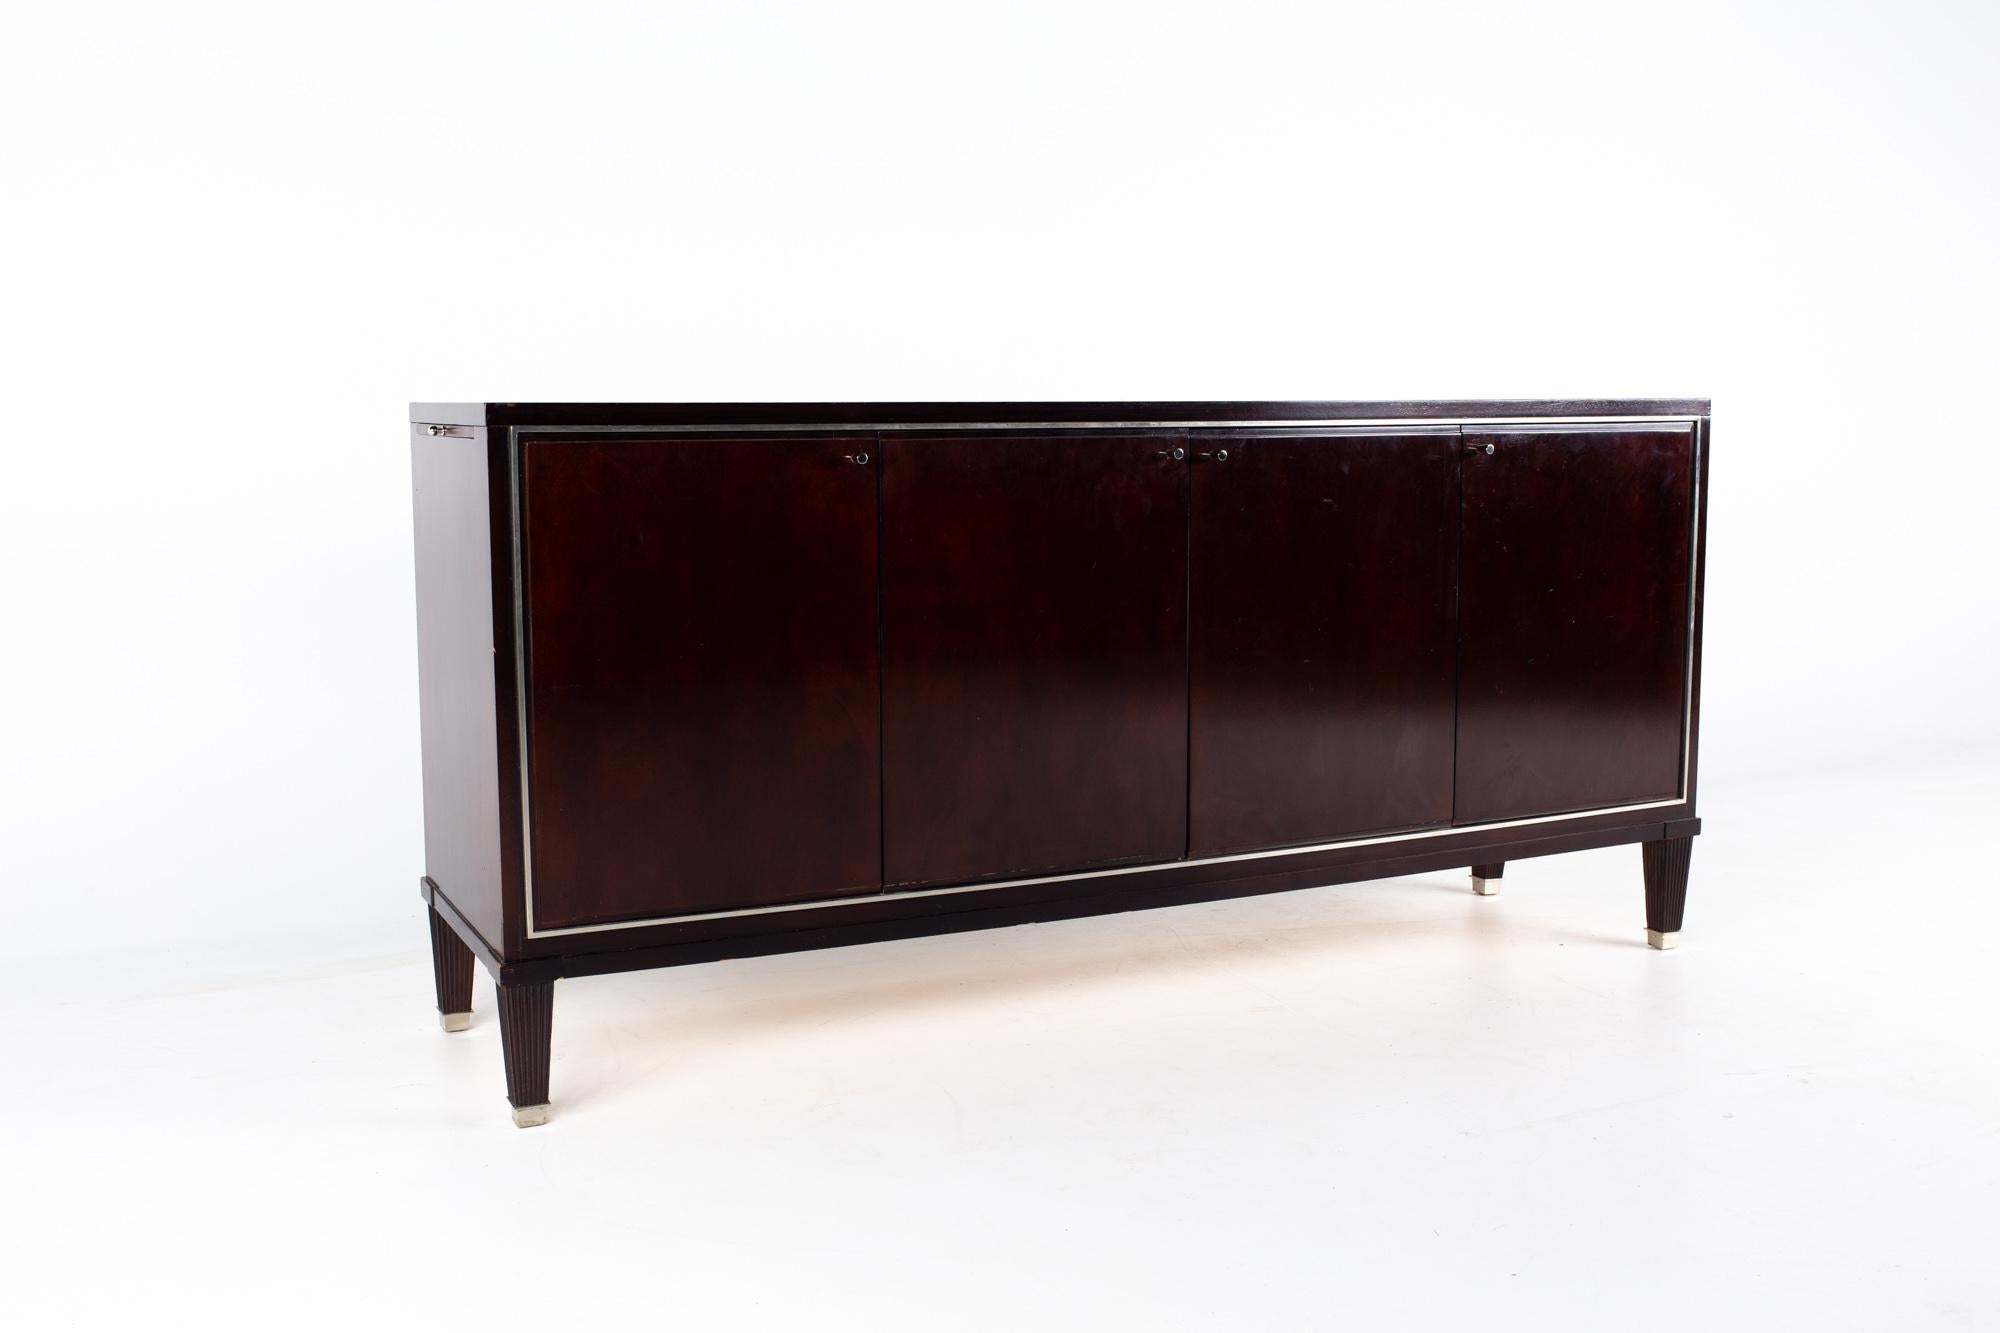 Barbara Barry for Baker Mahogany sideboard buffet Credenza

This sideboard measures: 69 wide x 18 deep x 32 inches high

About photos: We take our photos in a controlled lighting studio to show as much detail as possible. We do not photoshop out